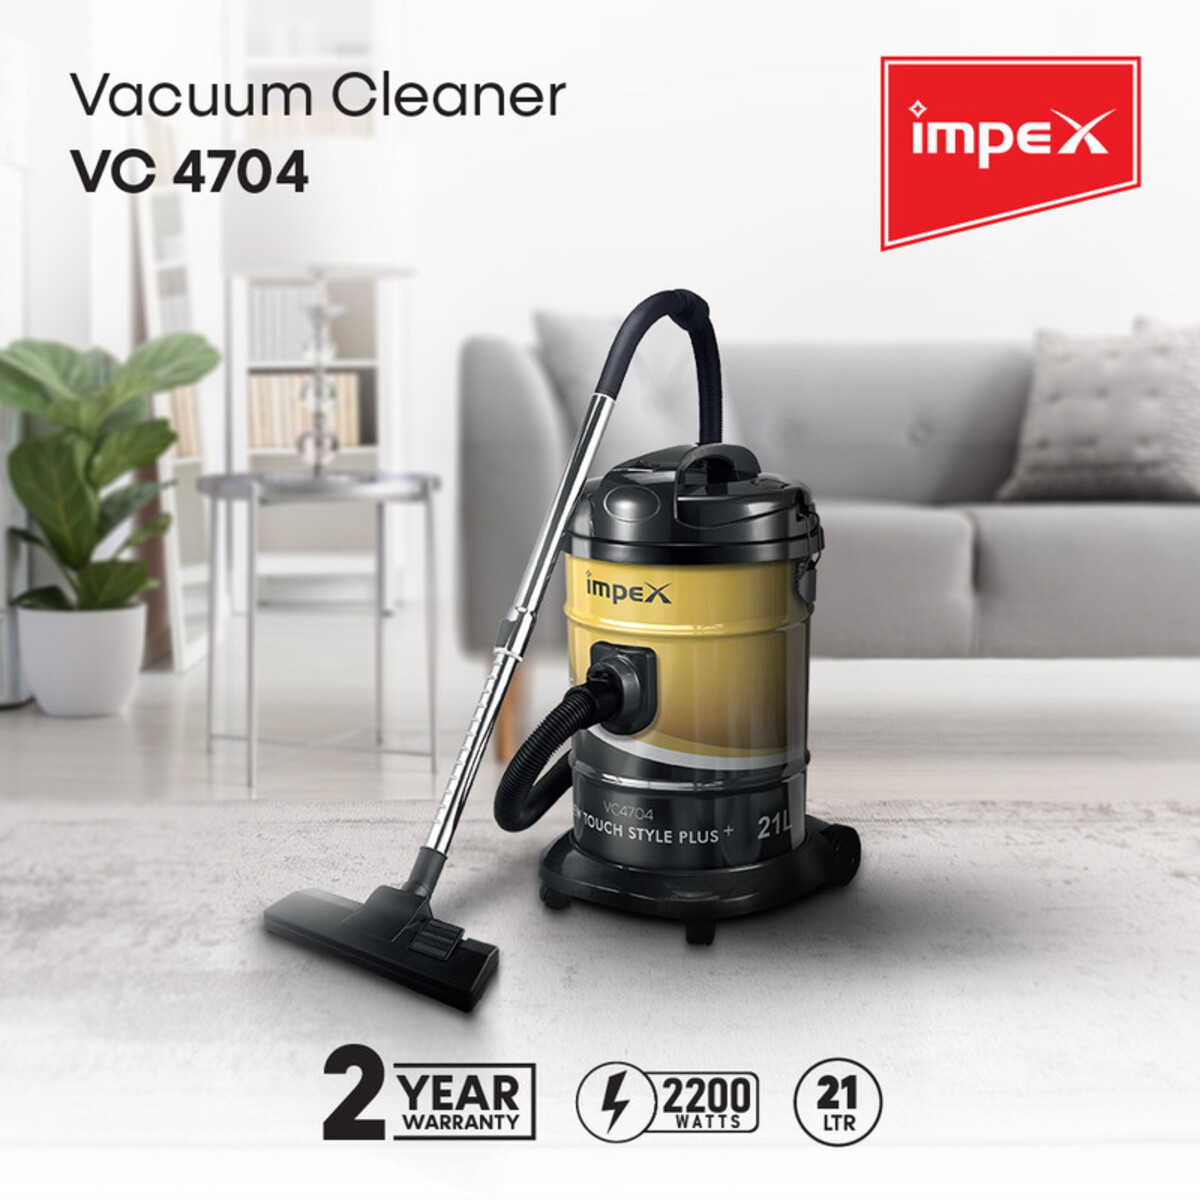 Impex Vc 4704 2000 Watts 21 Litre Vacuum Cleaner